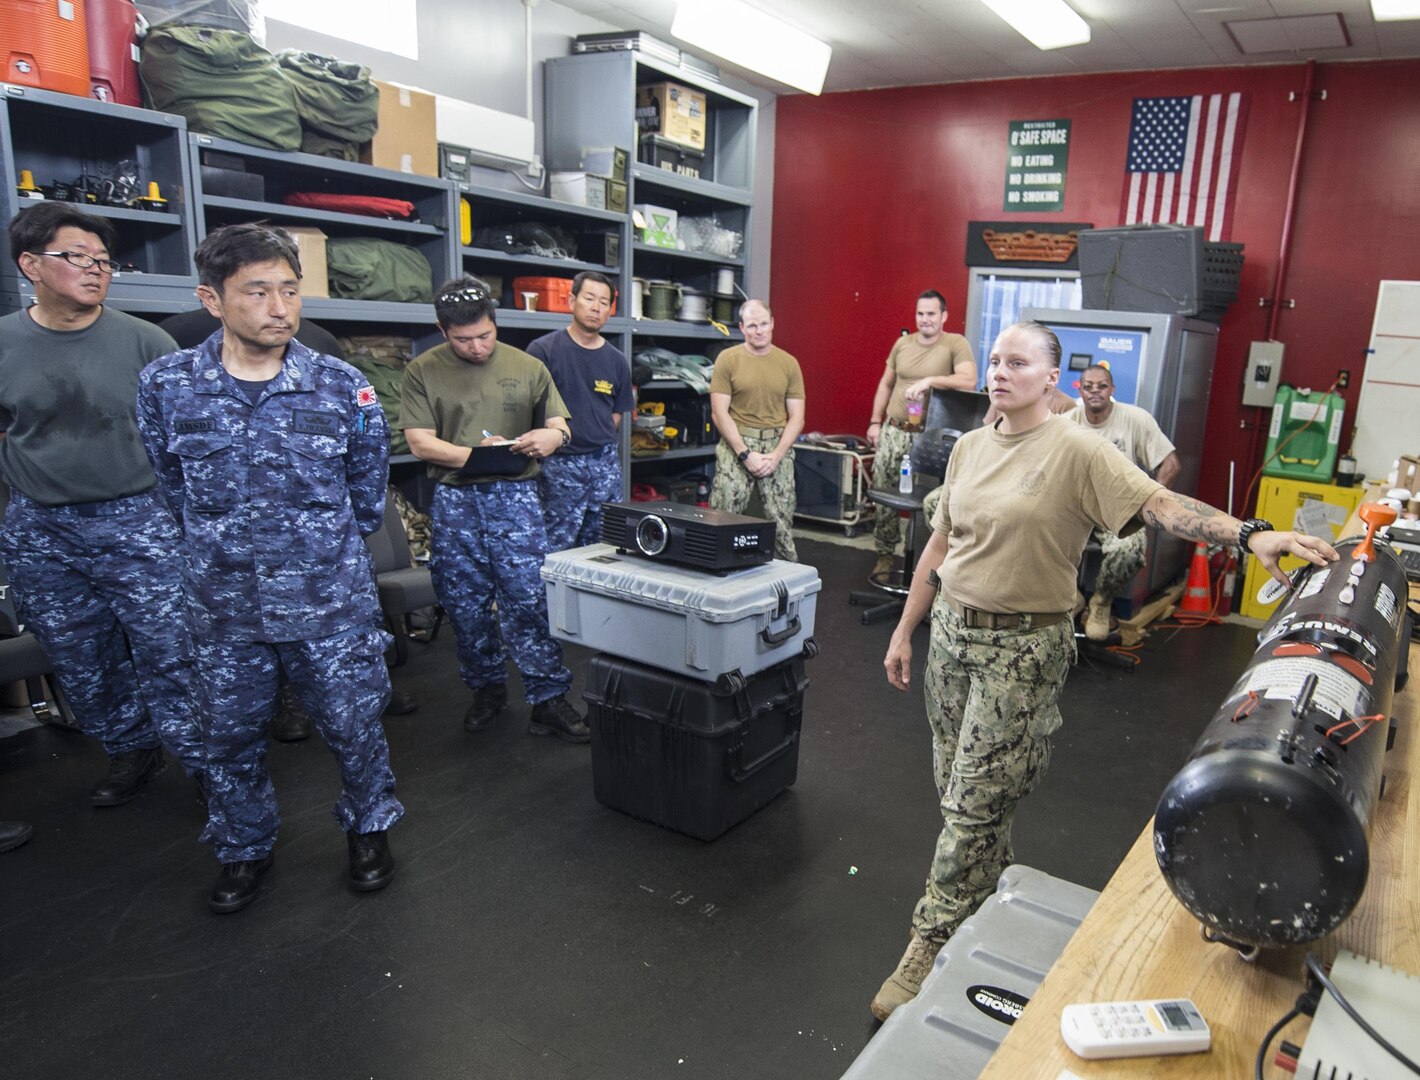 A U.S. Navy Sailor assigned to Explosive Ordnance Disposal (EOD) Mobile Unit One explains the MK18 Mod. 1 unmanned underwater vehicle to Japan Maritime Self-Defense Force (JMSDF) EOD technicians during exercise Malabar 2016. A trilateral maritime exercise, Malabar is designed to enhance dynamic cooperation between the Indian Navy, Japan Maritime Self-Defense Force (JMSDF) and U.S. Navy forces in the Indo-Asia-Pacific. (U.S. Navy combat camera photo by Mass Communication Specialist 1st Class Charles E. White/Released)